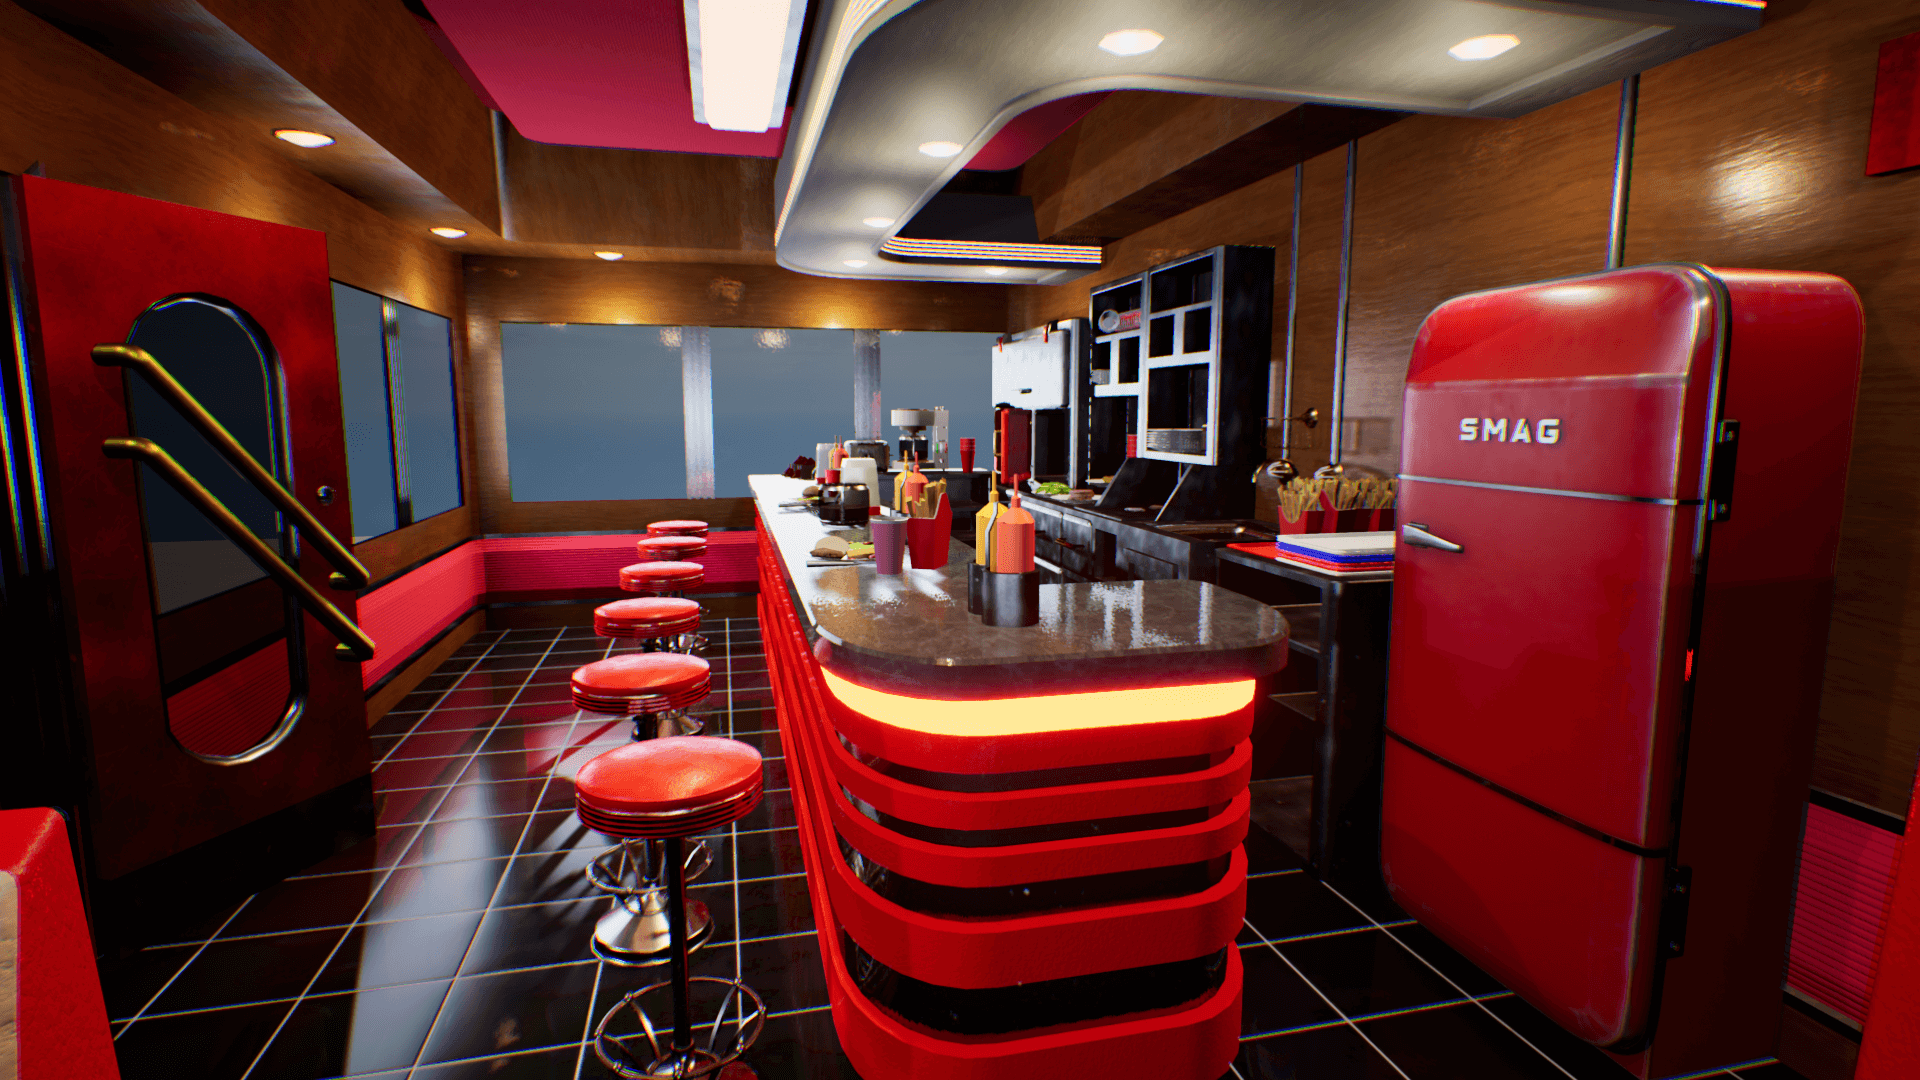 An image showing Rickey's Diner Car asset pack, created with Unreal Engine.